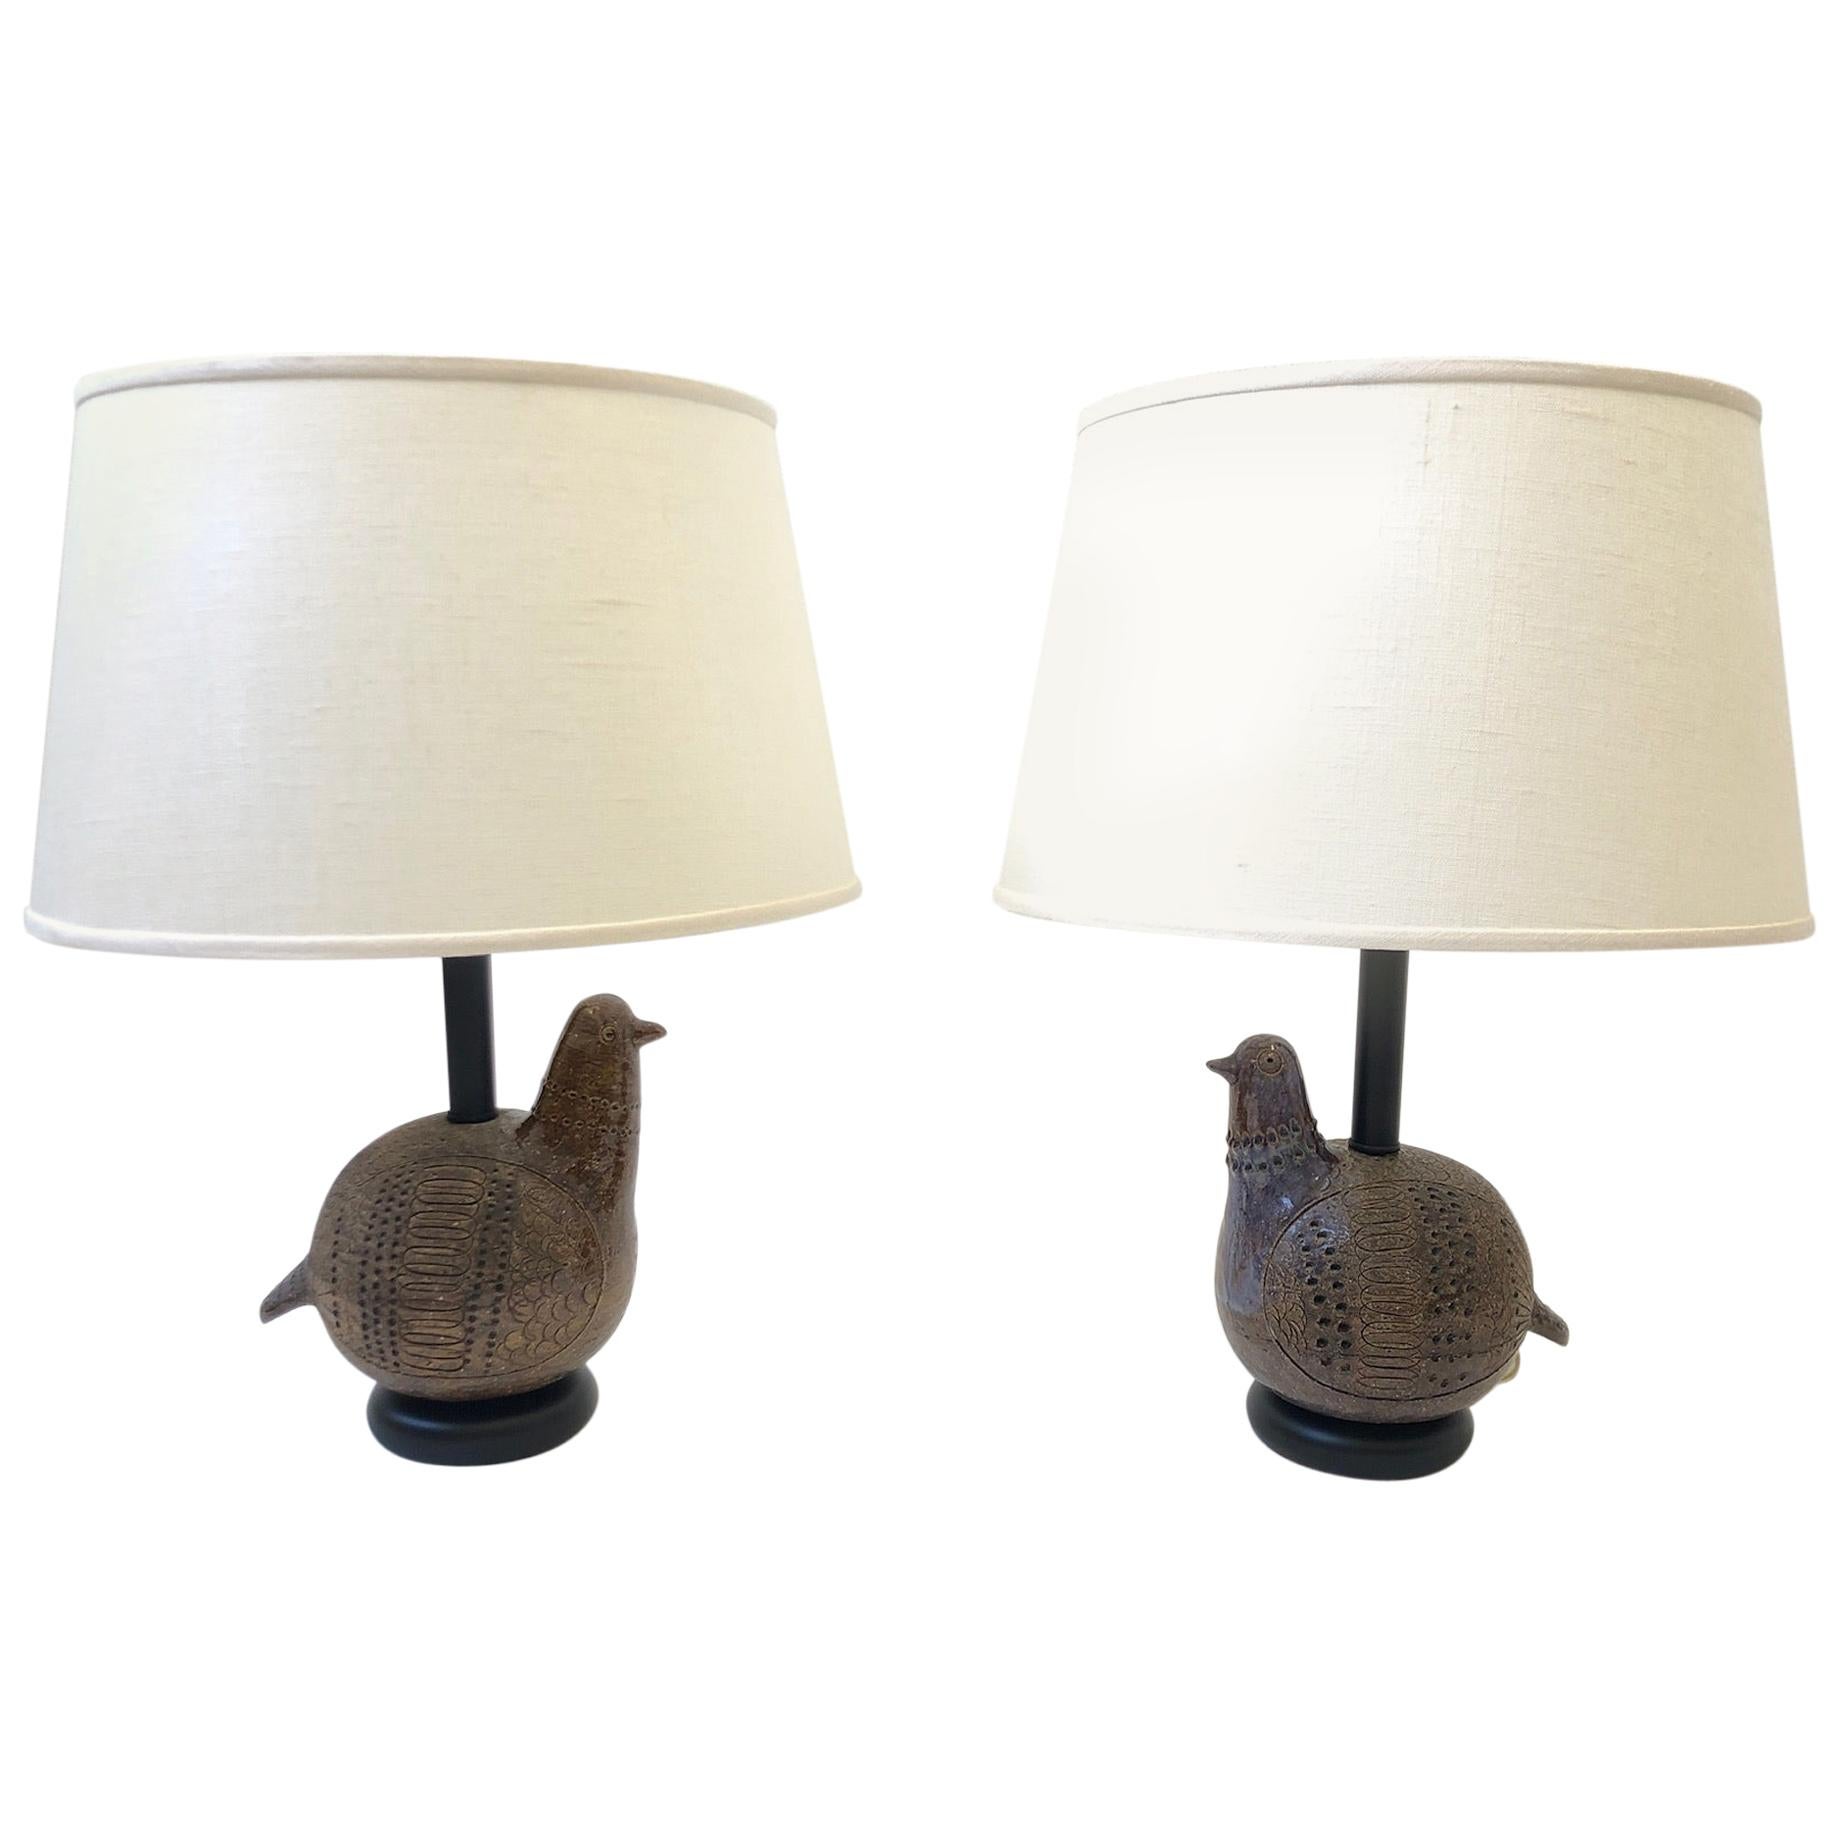 Pair of Italian Brown Ceramic Birds Table Lamps by Bitossi